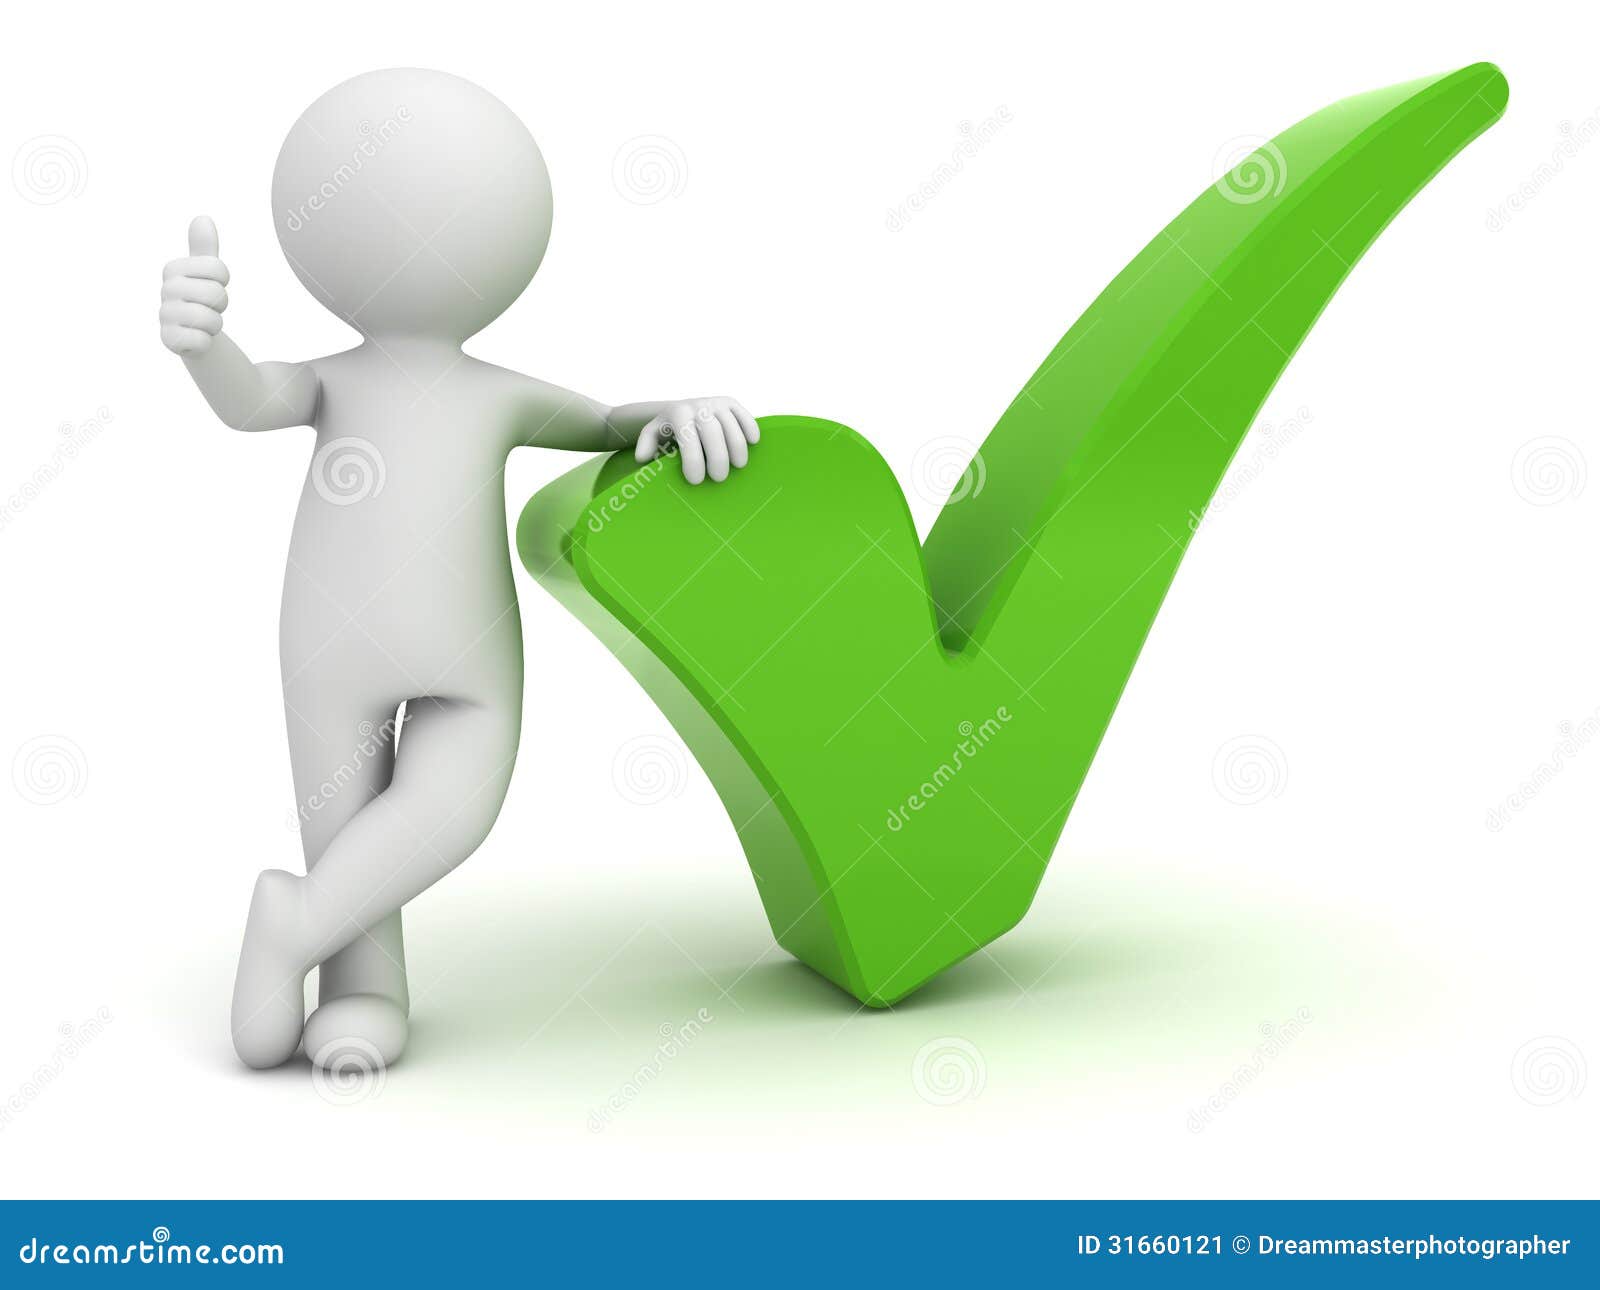 3d man showing thumbs up with green check mark over white